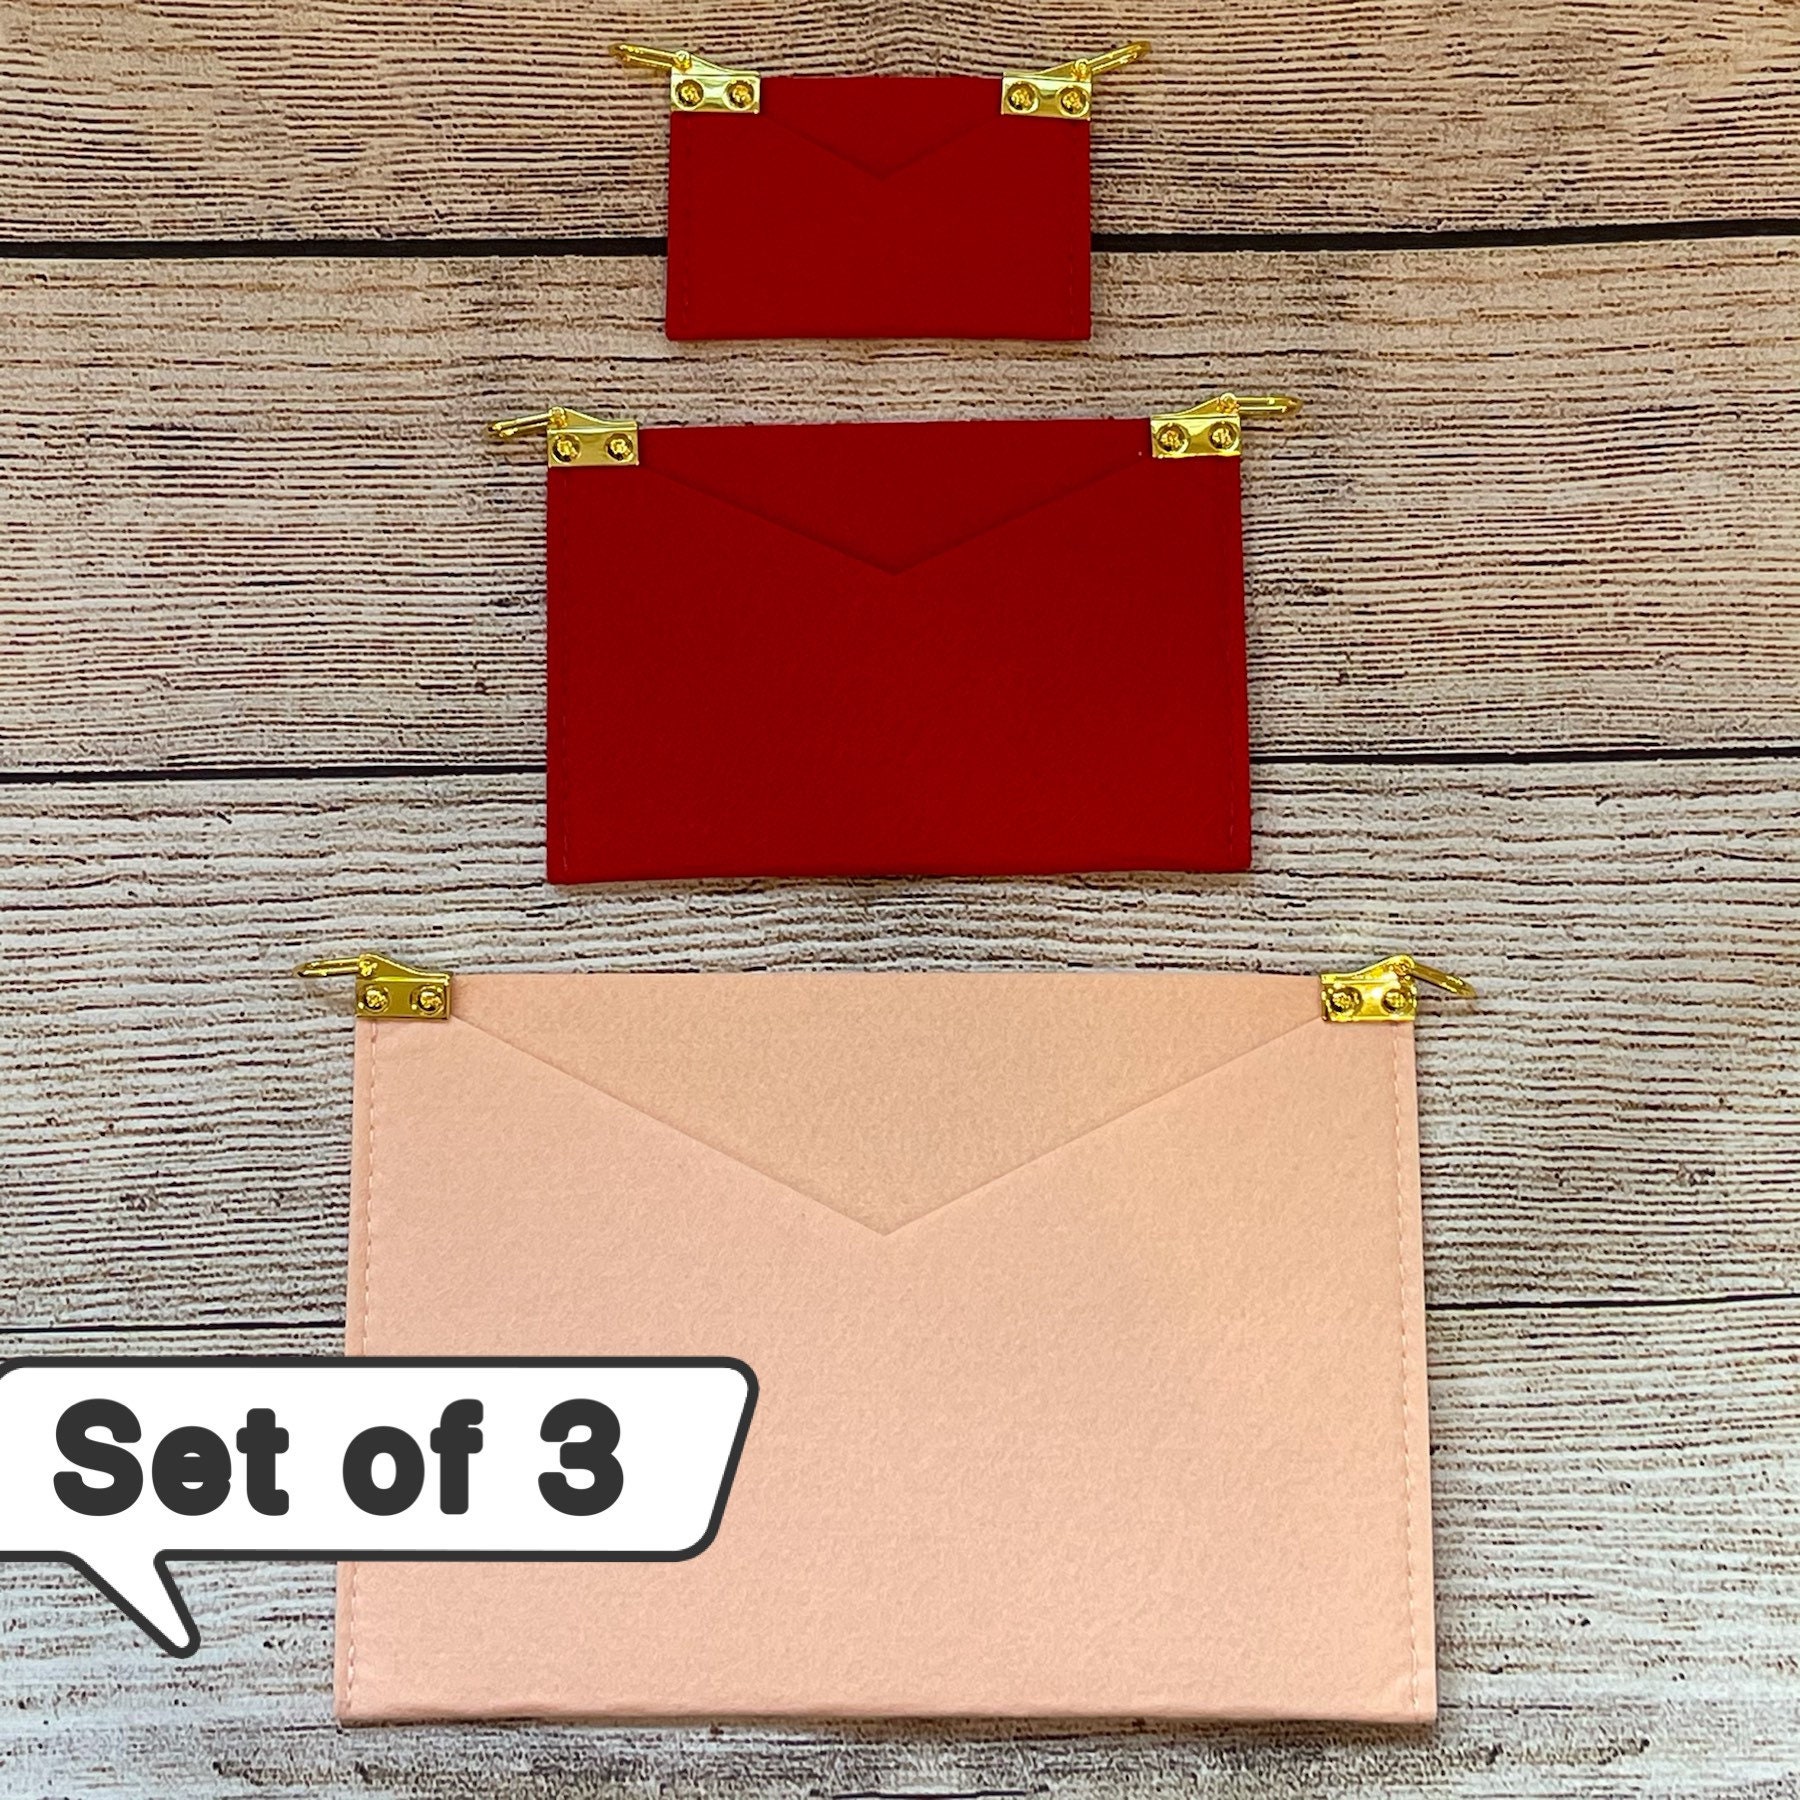  NEW Velvet Kirigami Conversion Kit with Chain, Kirigami Pochette  Insert with O Rings Full Set of 3, Kirigami Organizer with Gold Chain (All  3 Inserts + 120cm Gold Chain) : Handmade Products